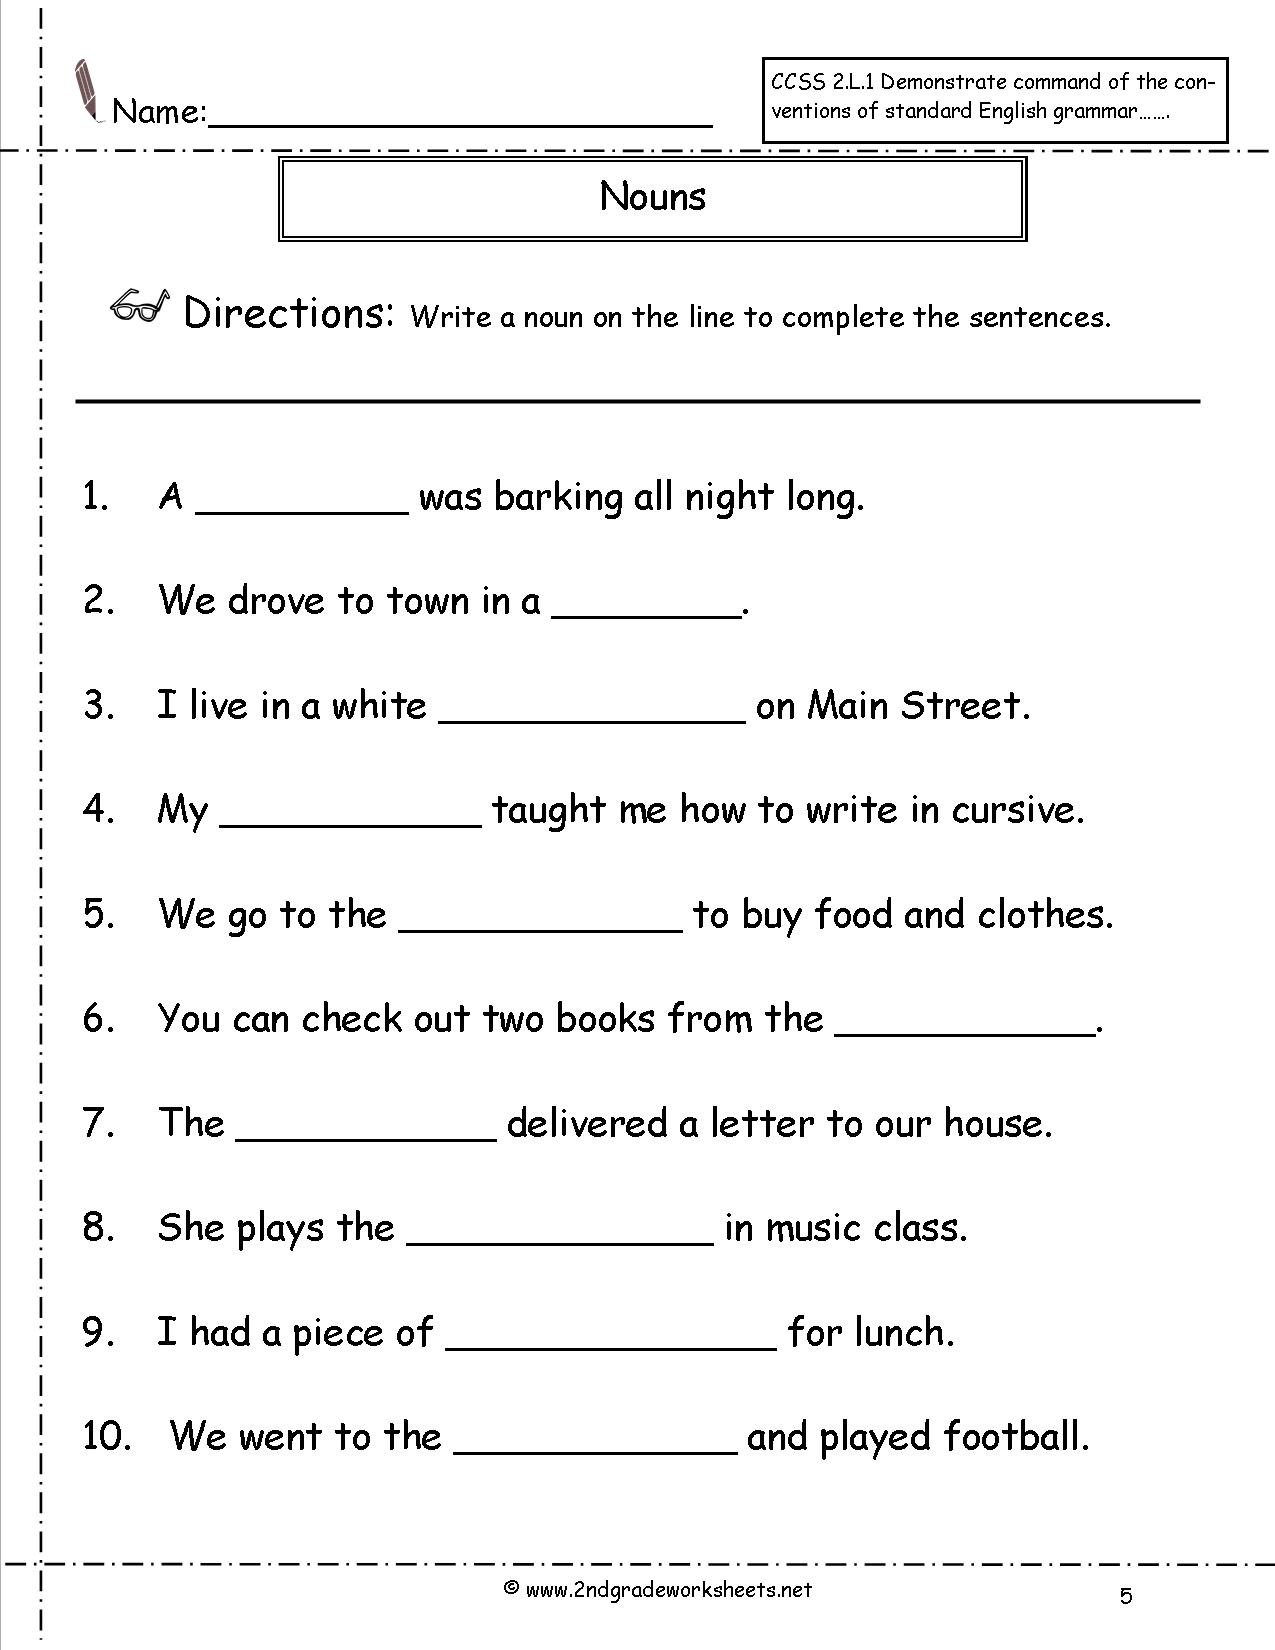 20 Best Images Of Abbreviations Worksheets 7th Grade Month Abbreviations Worksheets States